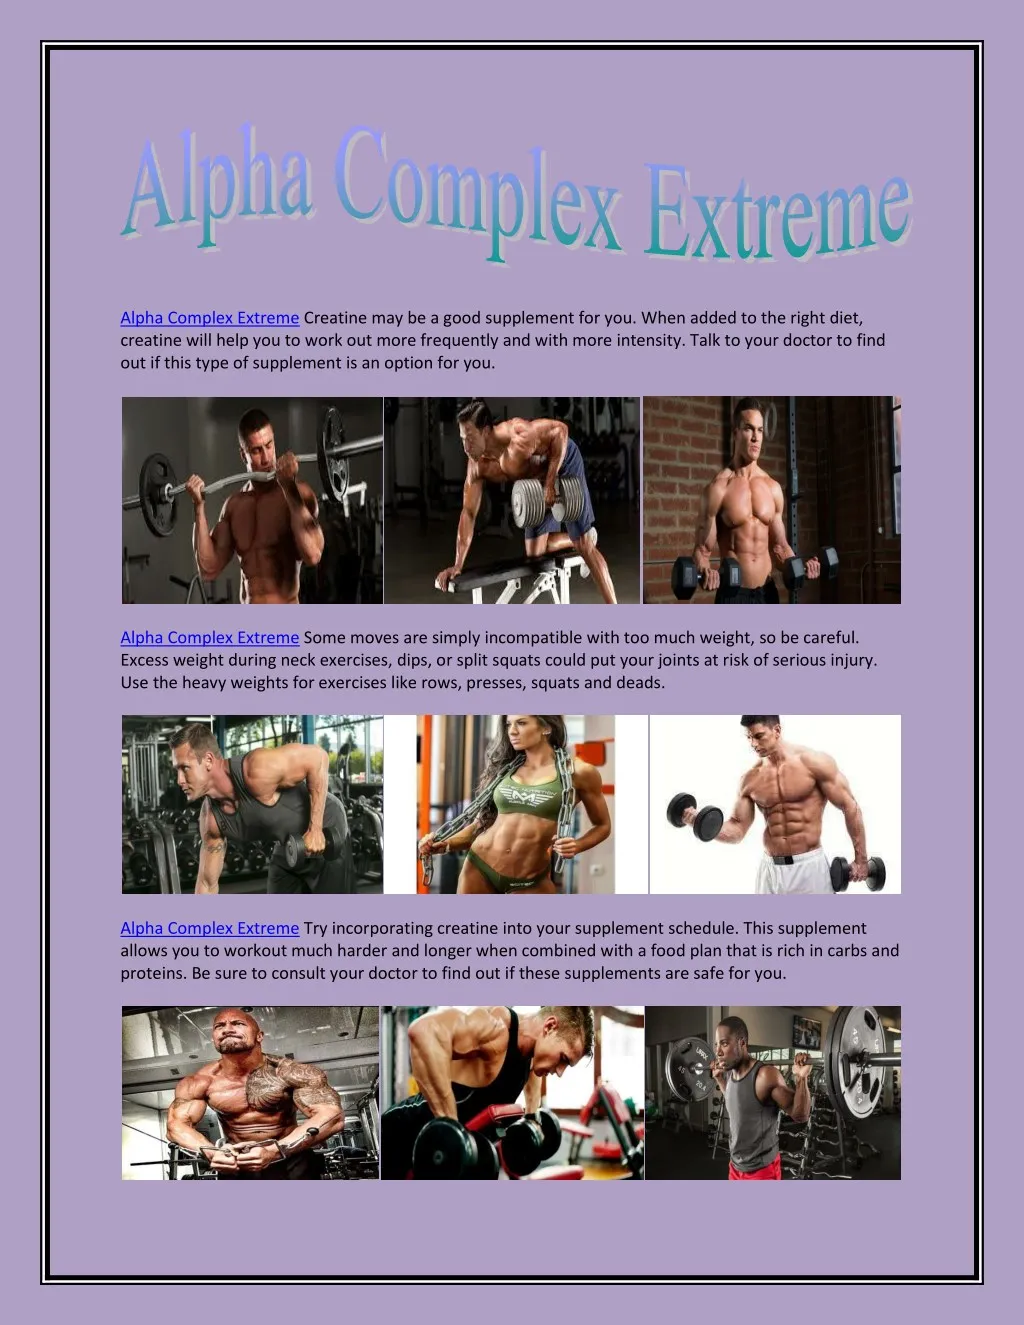 alpha complex extreme creatine may be a good